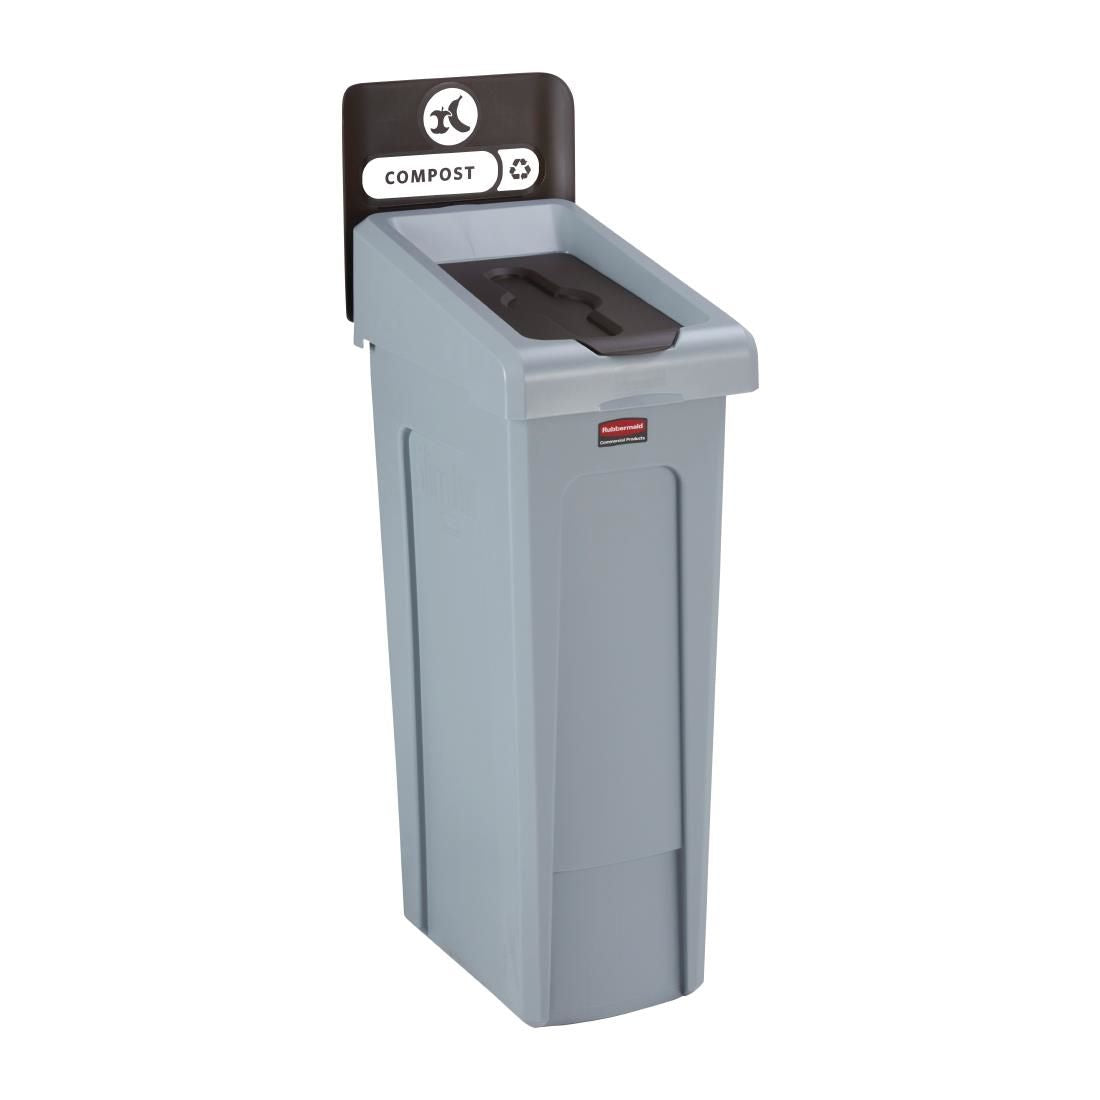 DY083 Rubbermaid Slim Jim Compost Recycling Station Brown 87Ltr